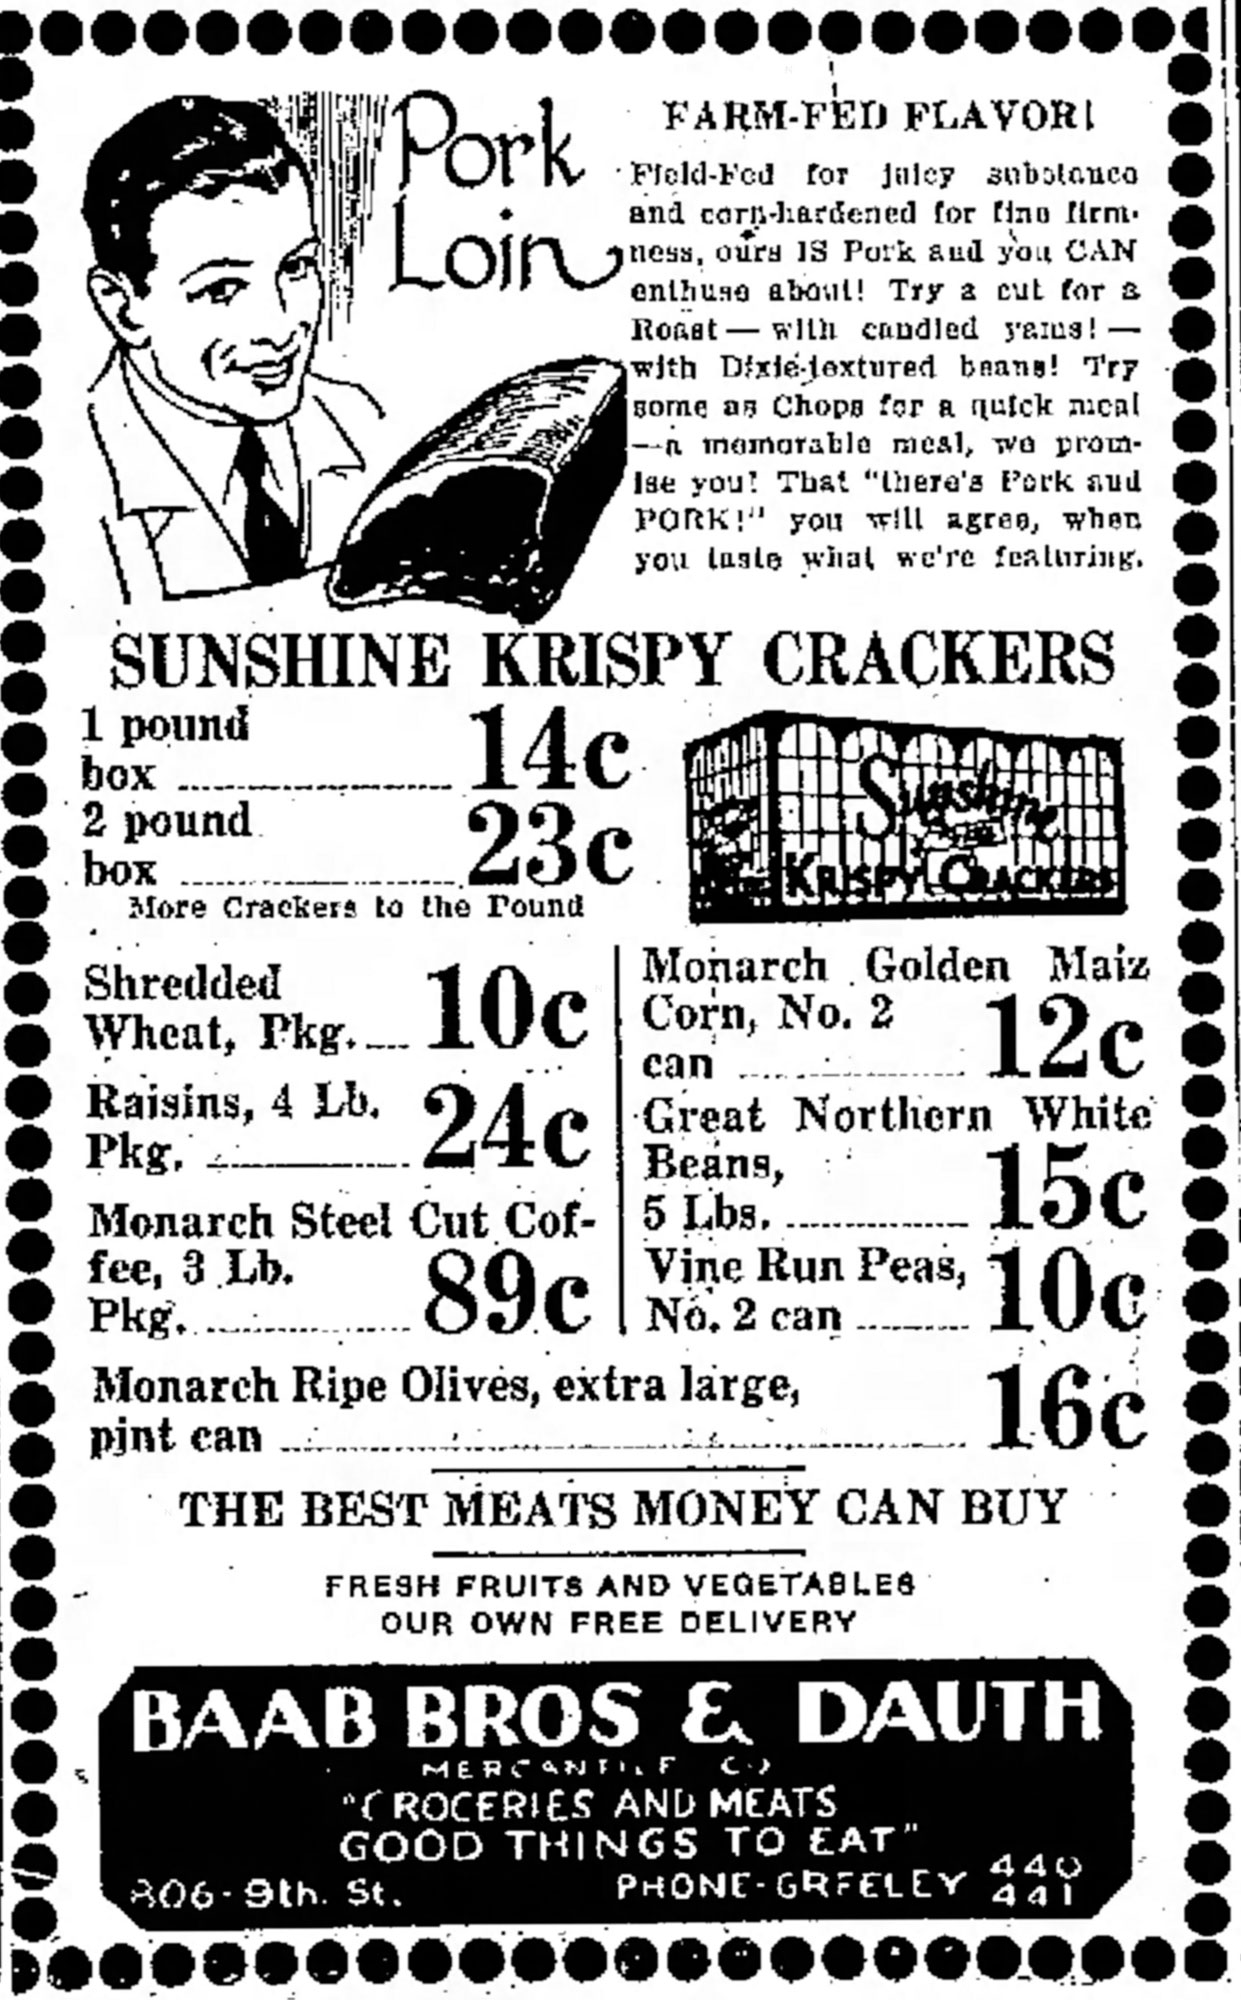 Dauth Family Archive - 1933-02-10 - Greeley Daily Tribune - Baab Bros and Dauth Advertisement